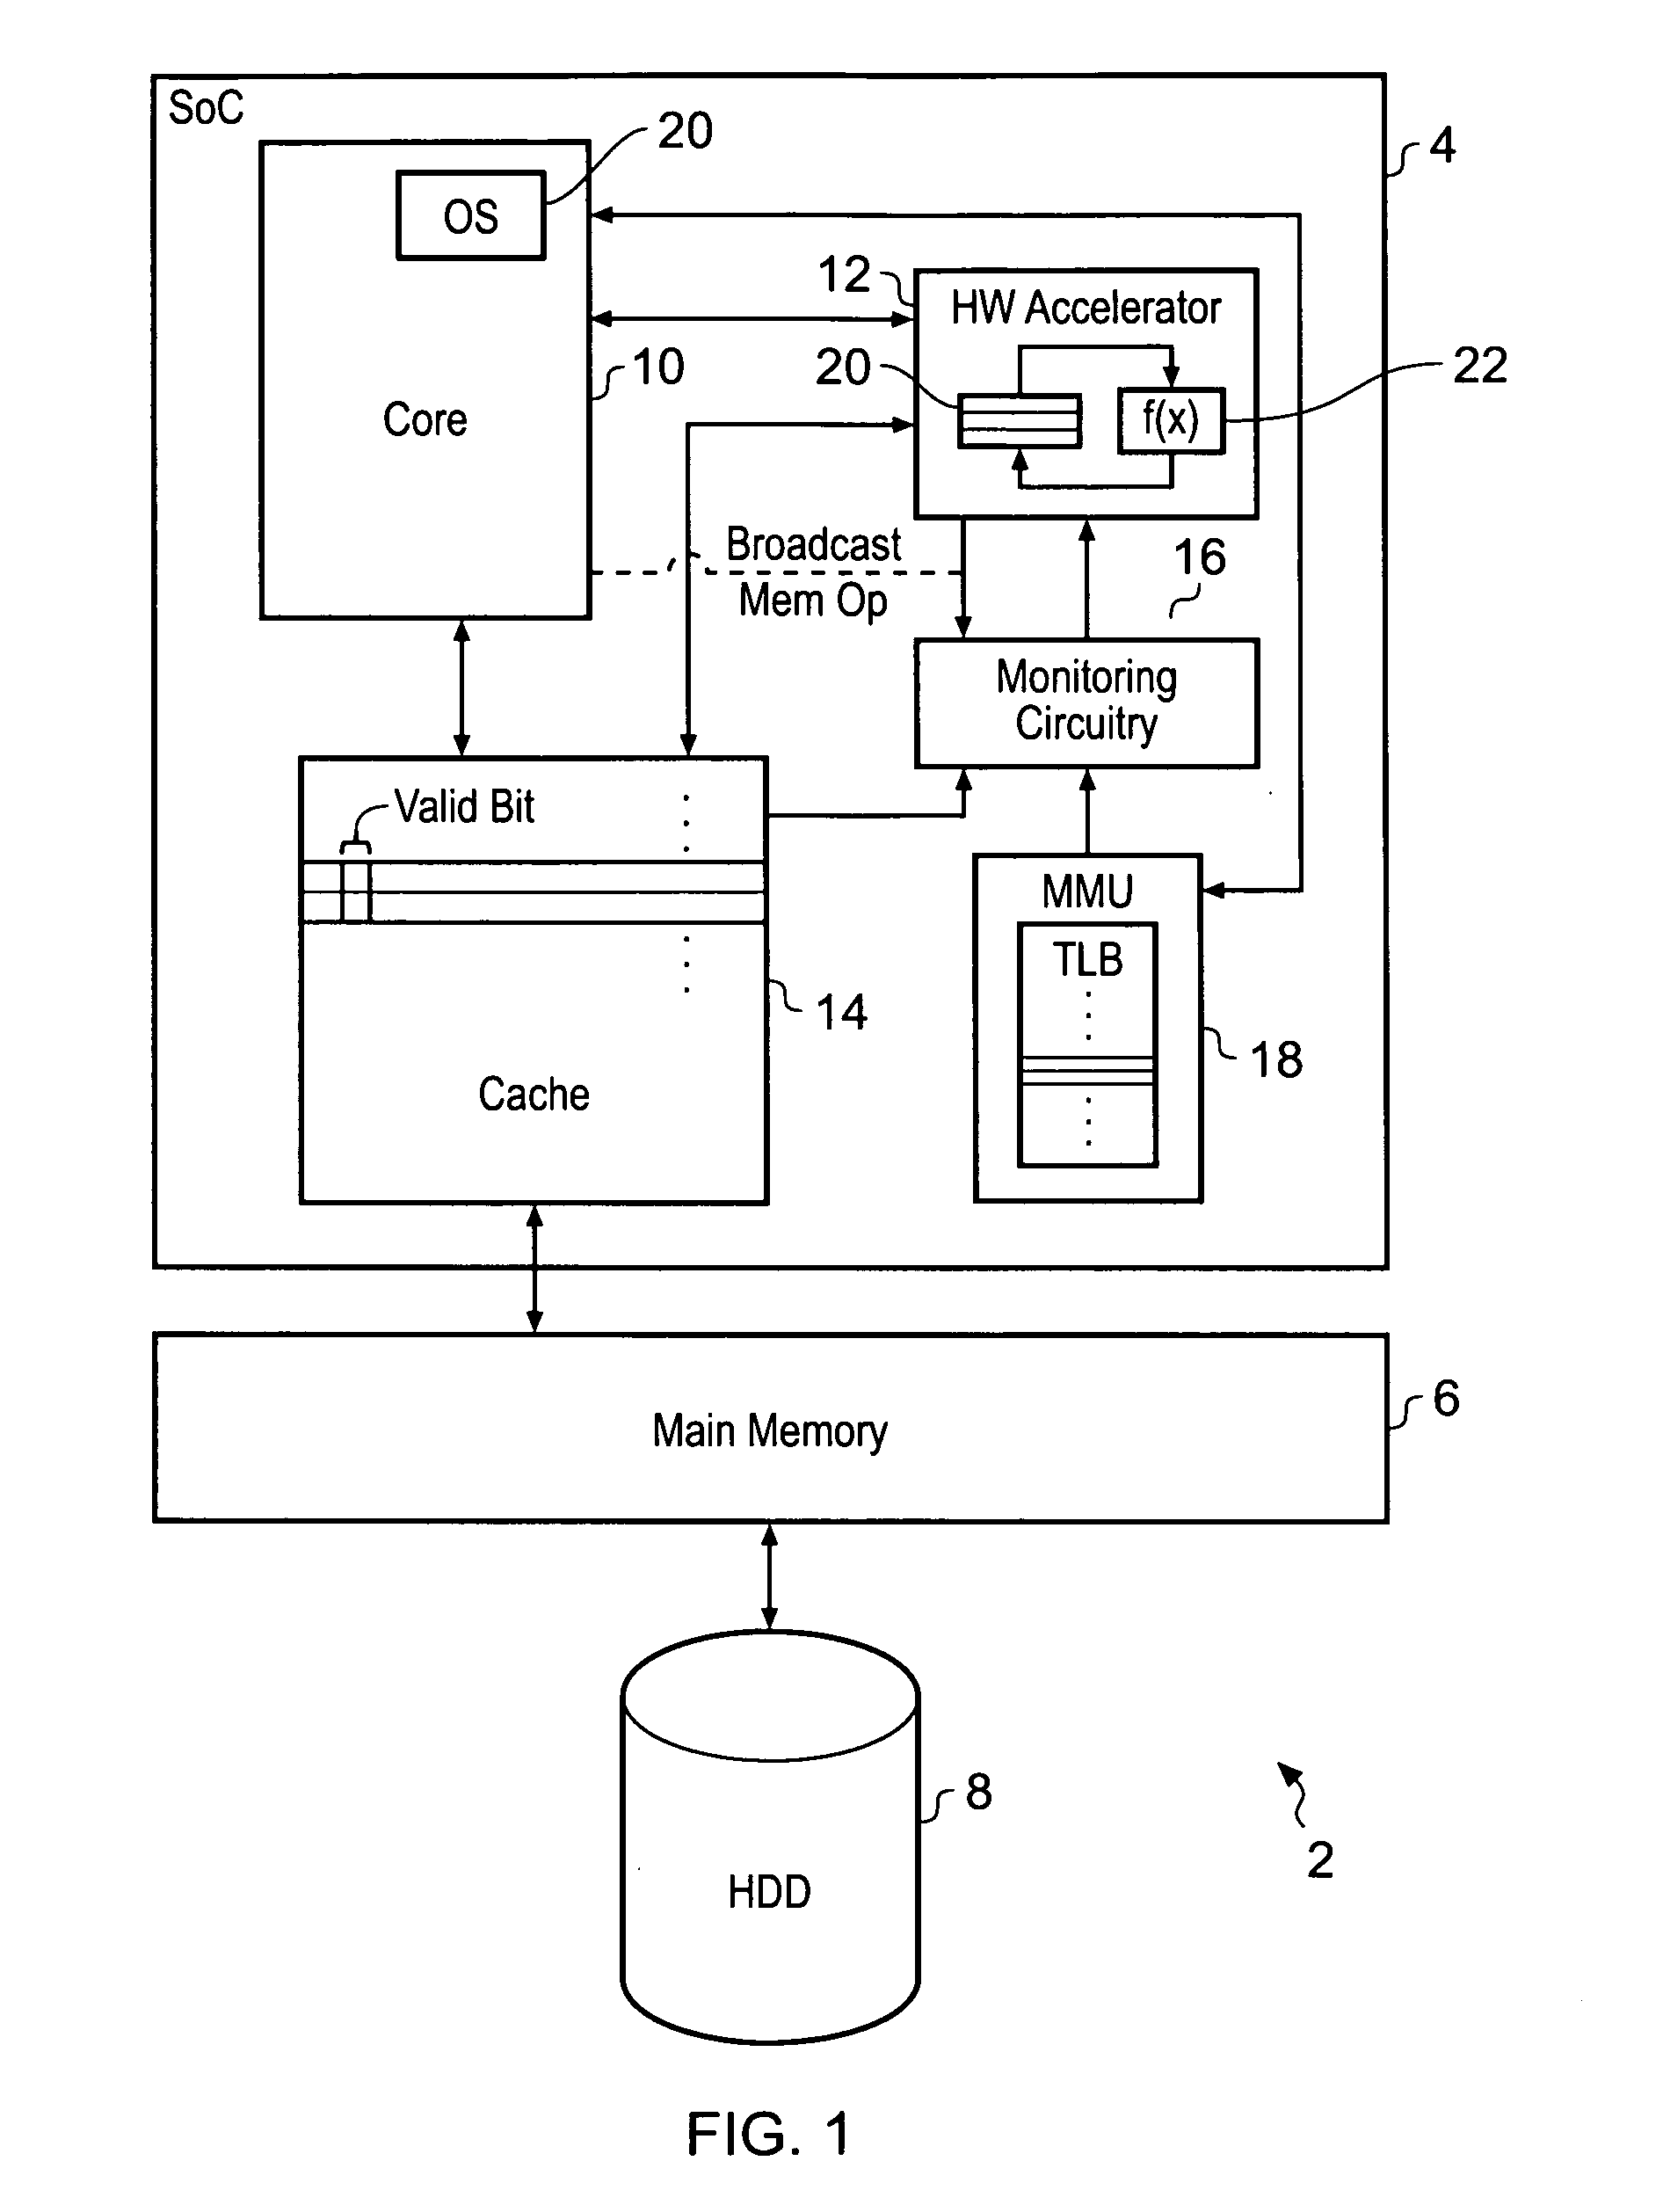 Controlling cleaning of data values within a hardware accelerator